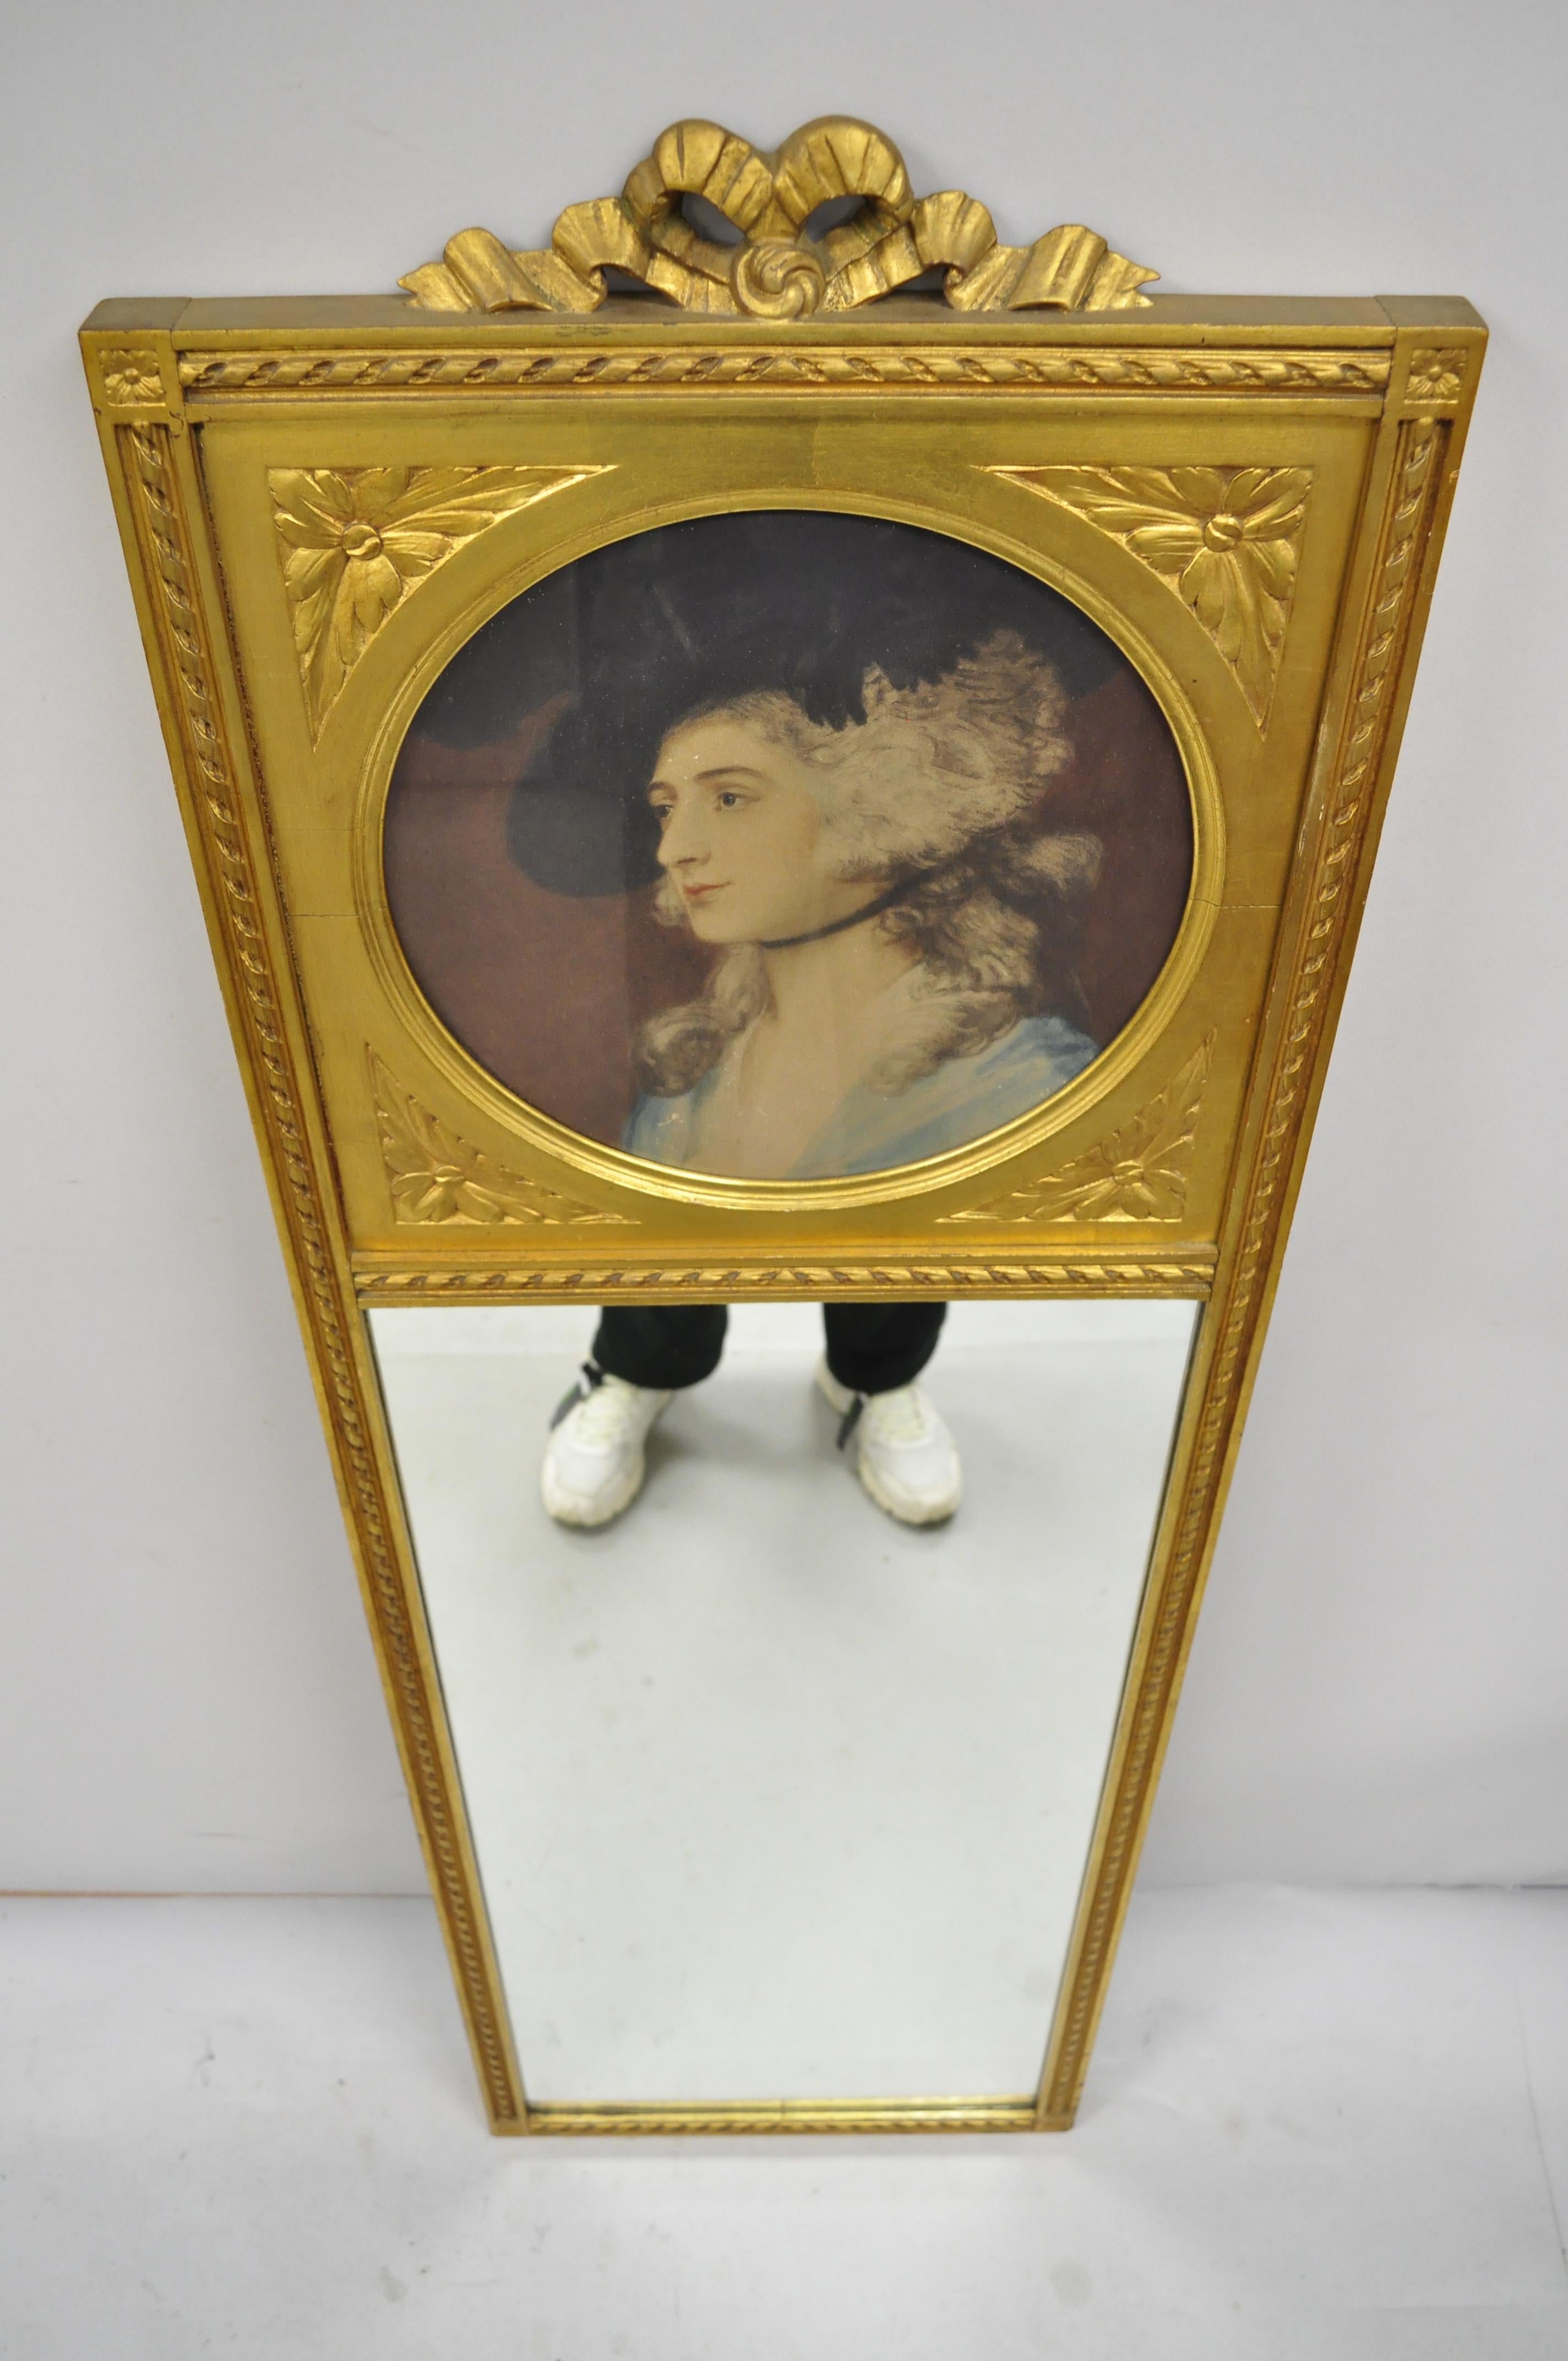 Antique French Louis XV style gold gilt wood mirror with portrait print. Item includes gold giltwood frame, central mirror, art portrait print, very nice antique item, great style and form, circa early 20th century. Measurements: 63